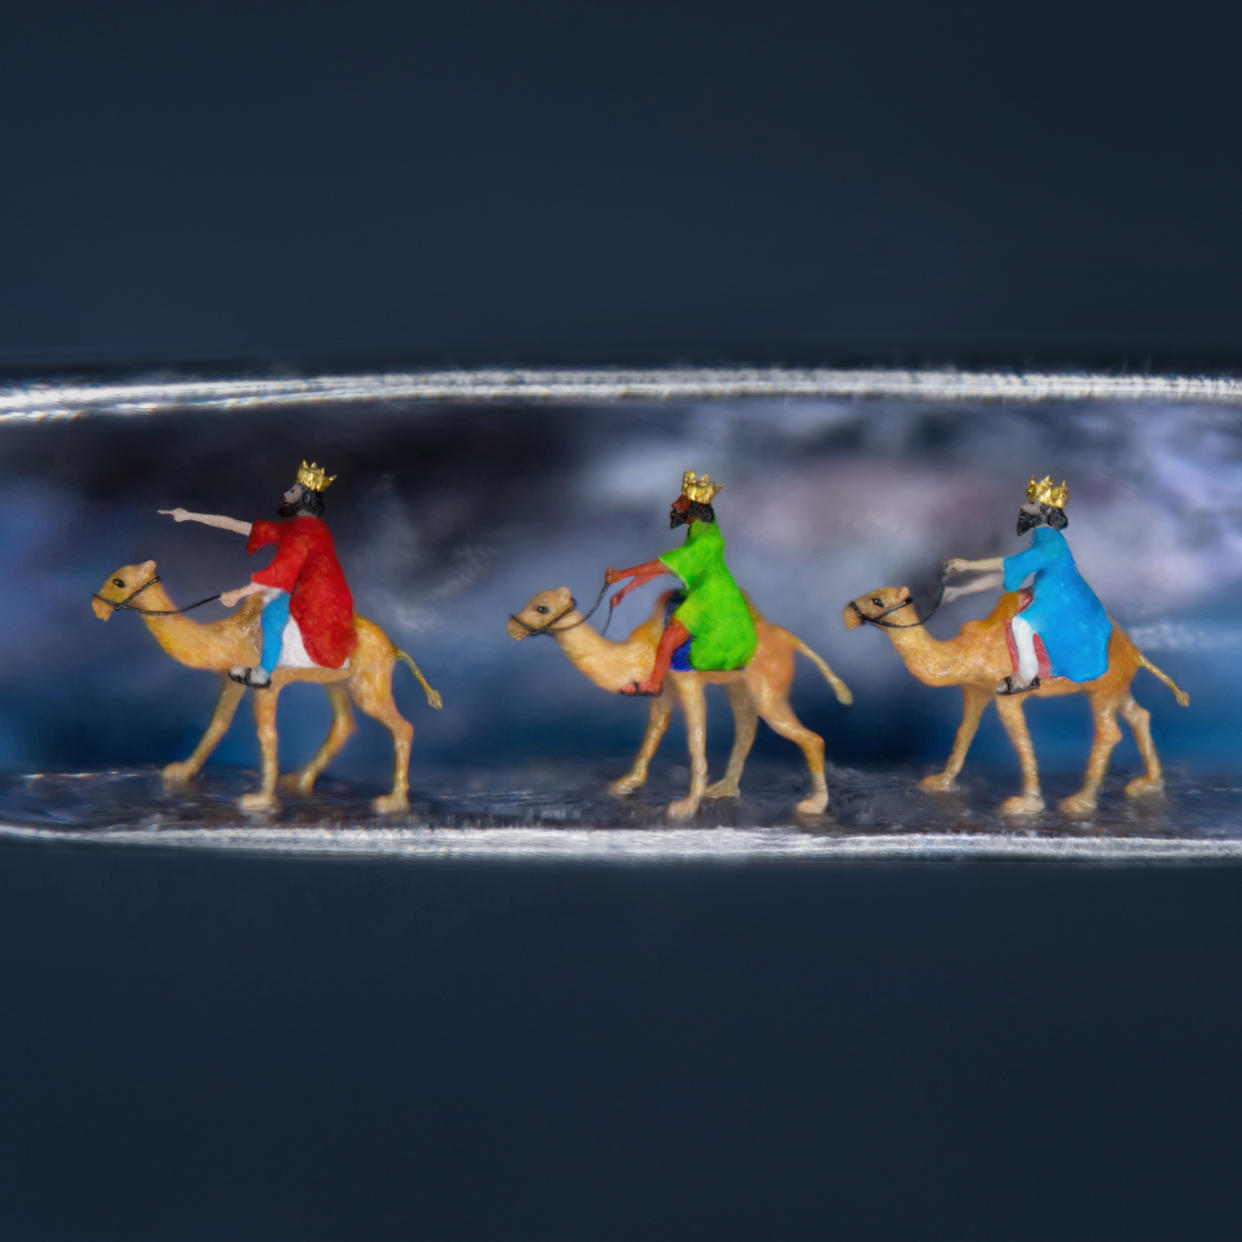 Image of three wise men inside the eye of the needle